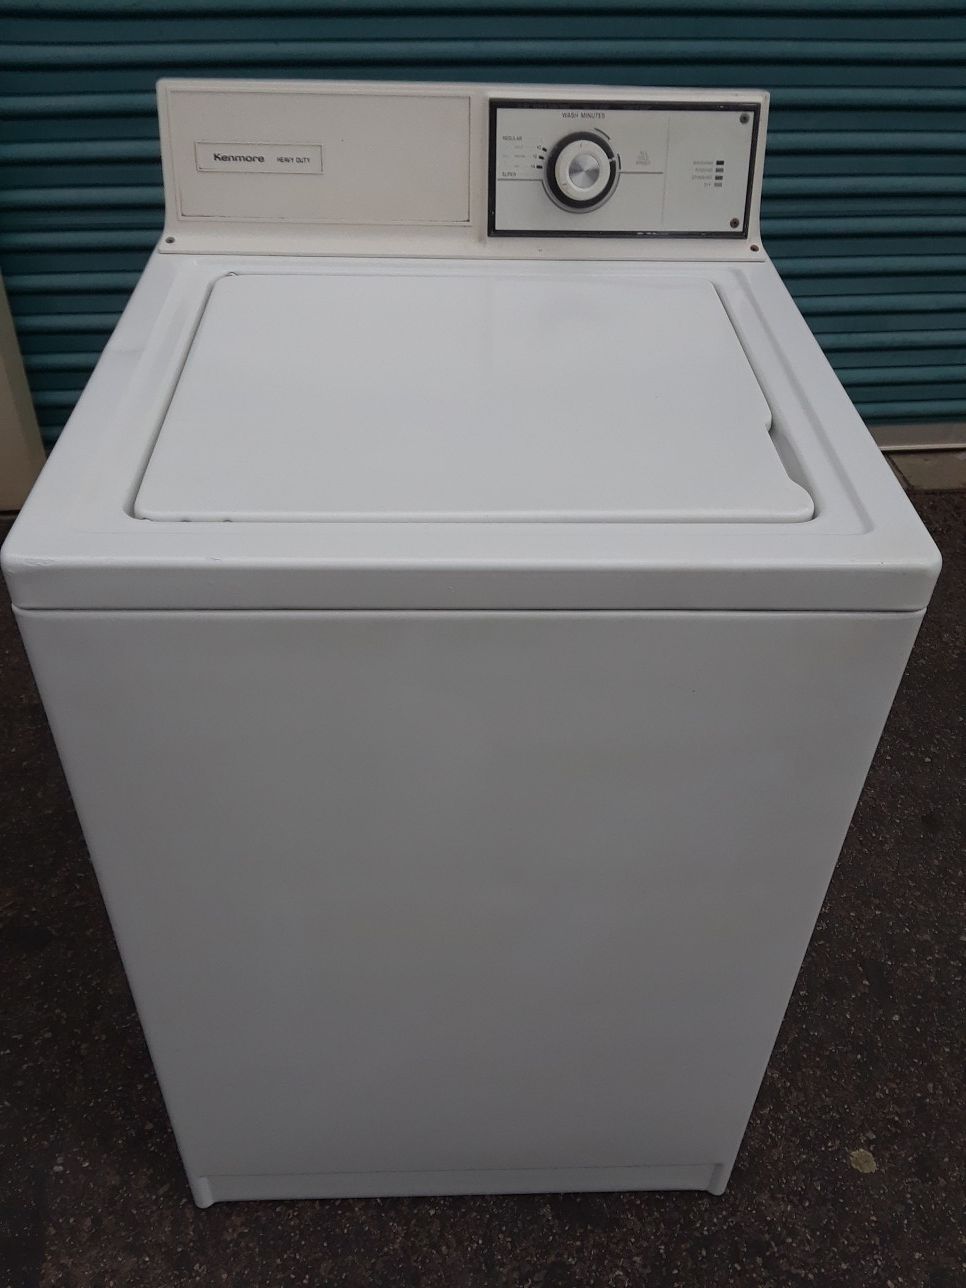 24 inch wide Kenmore washer...